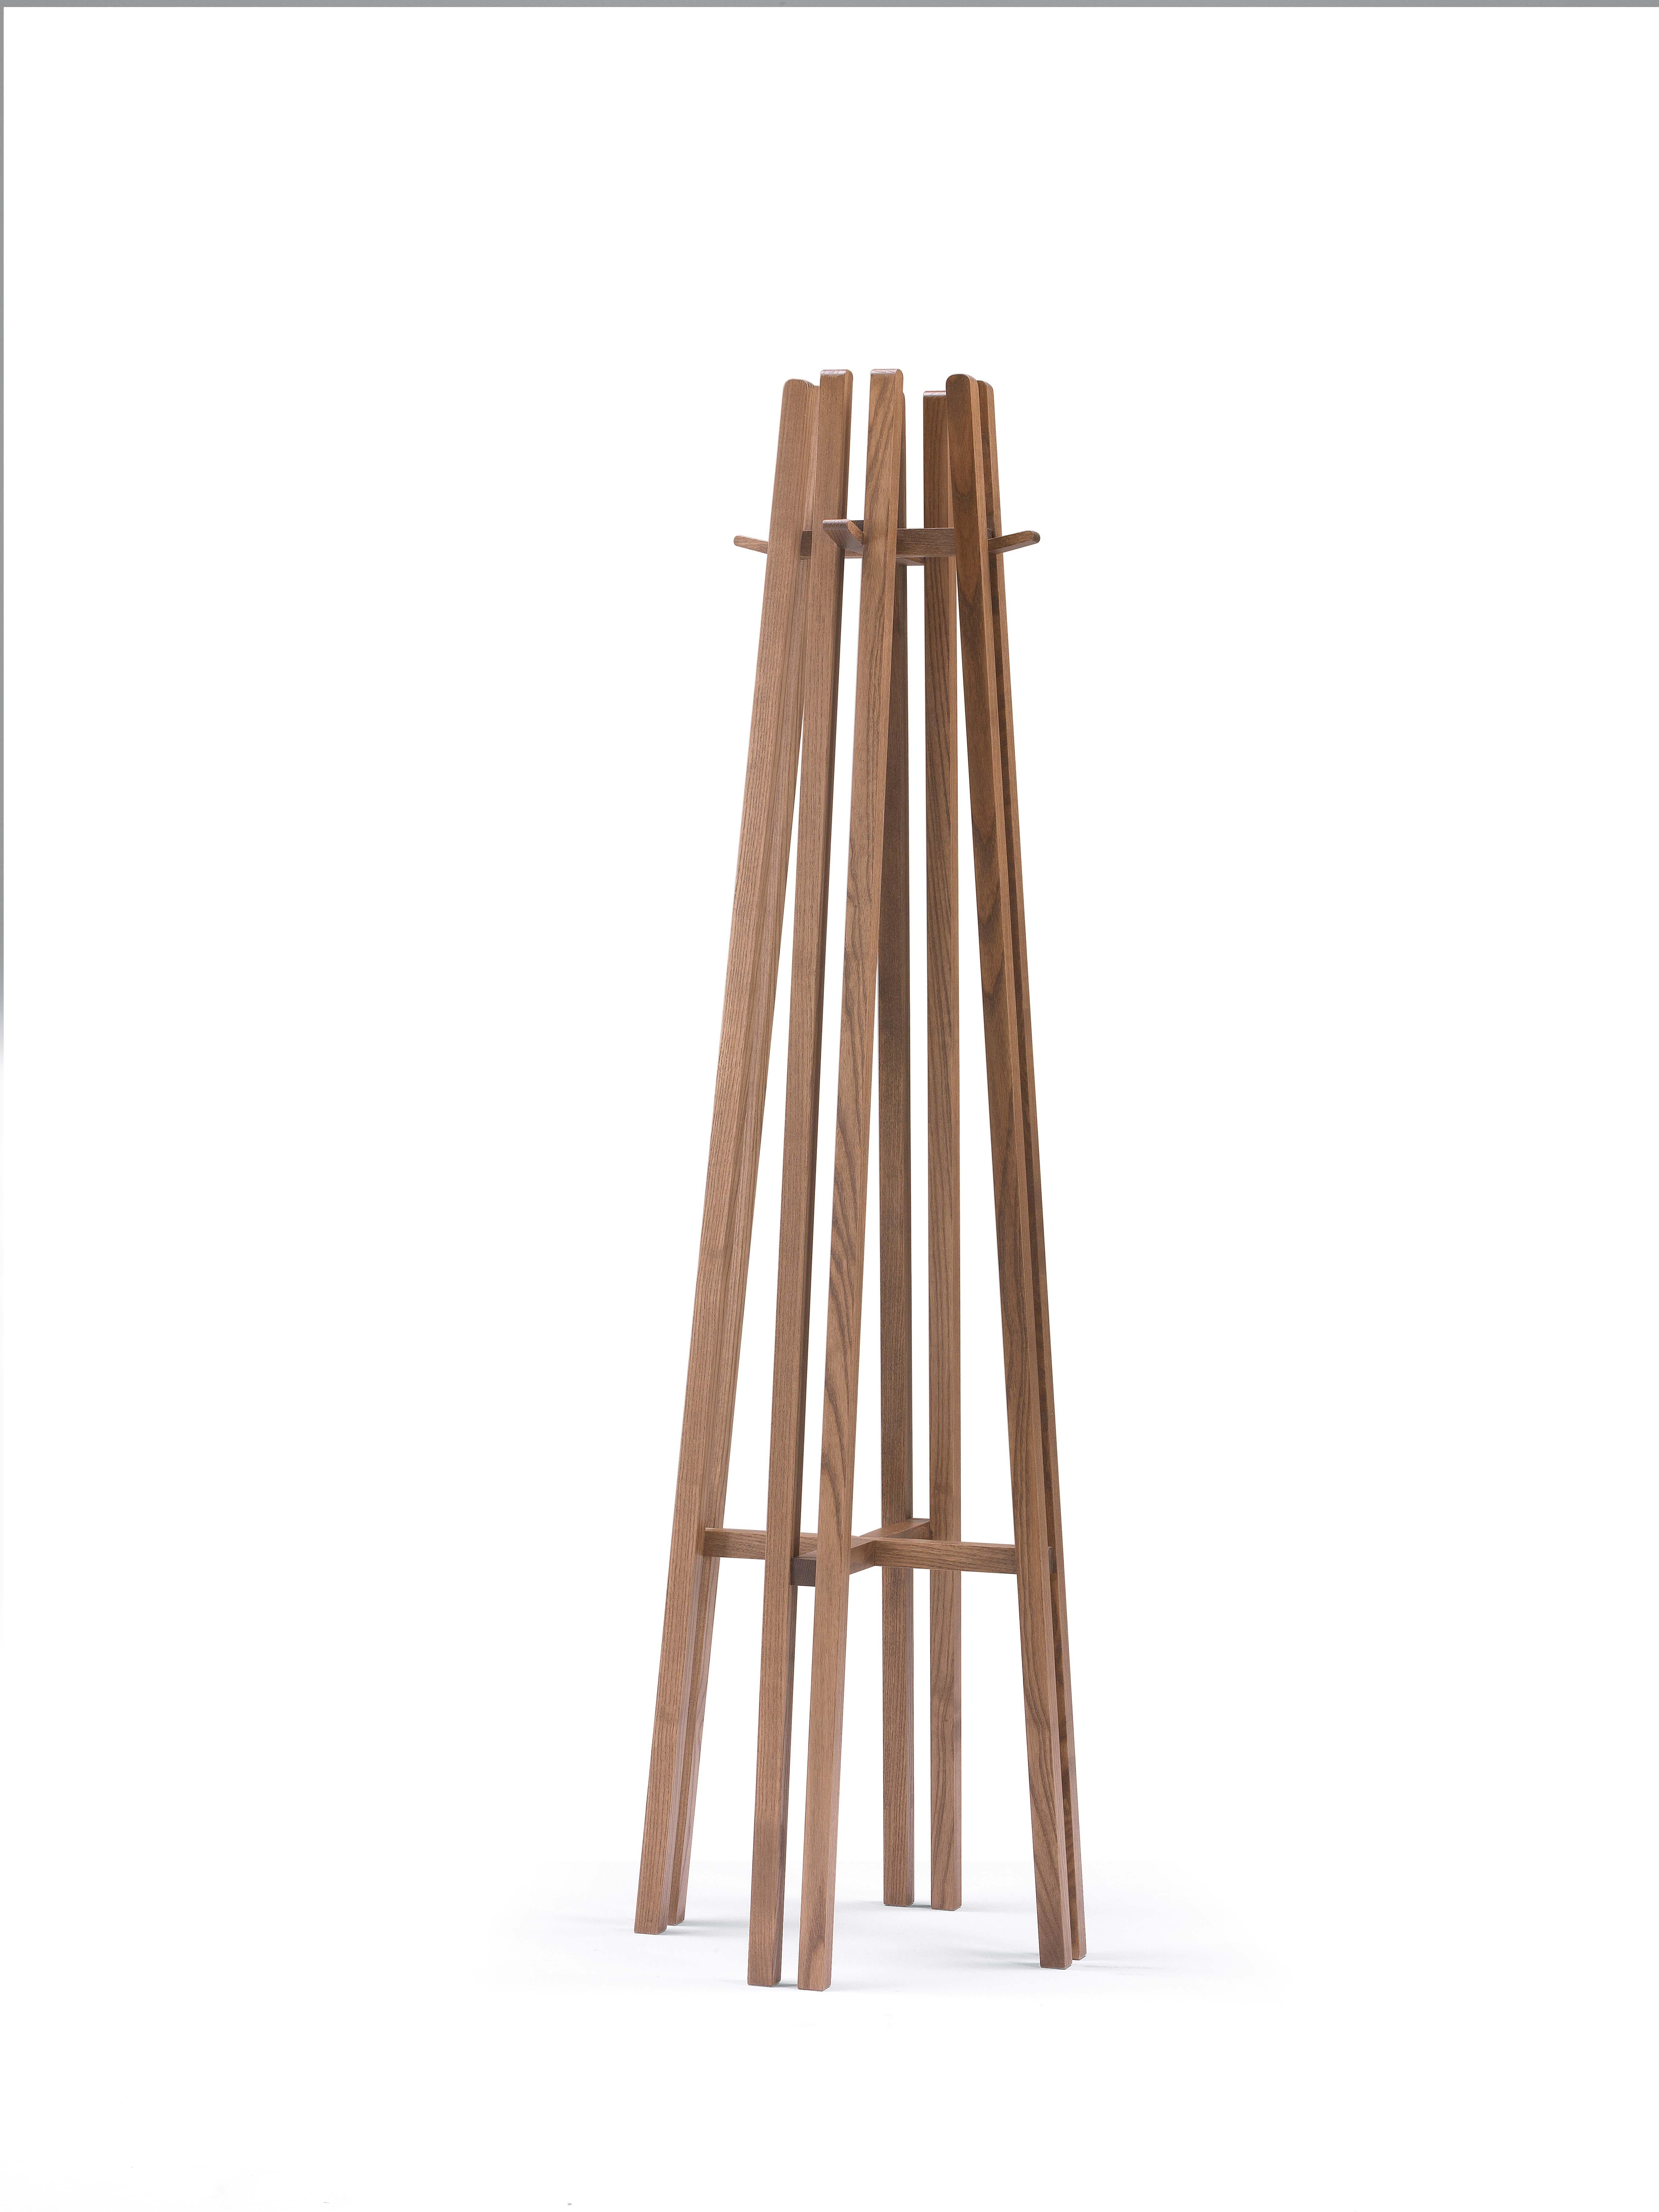 Clothes hanger element in solid ash. Available finishings: FN natural ash, CL American cherry, WG wengé, NC walnut, TB tobacco, open pore matte lacquered (L21 white, L29 pearl, L23 cappuccino colour, L25 smoke grey, L22 black, L24 red).

Fabio